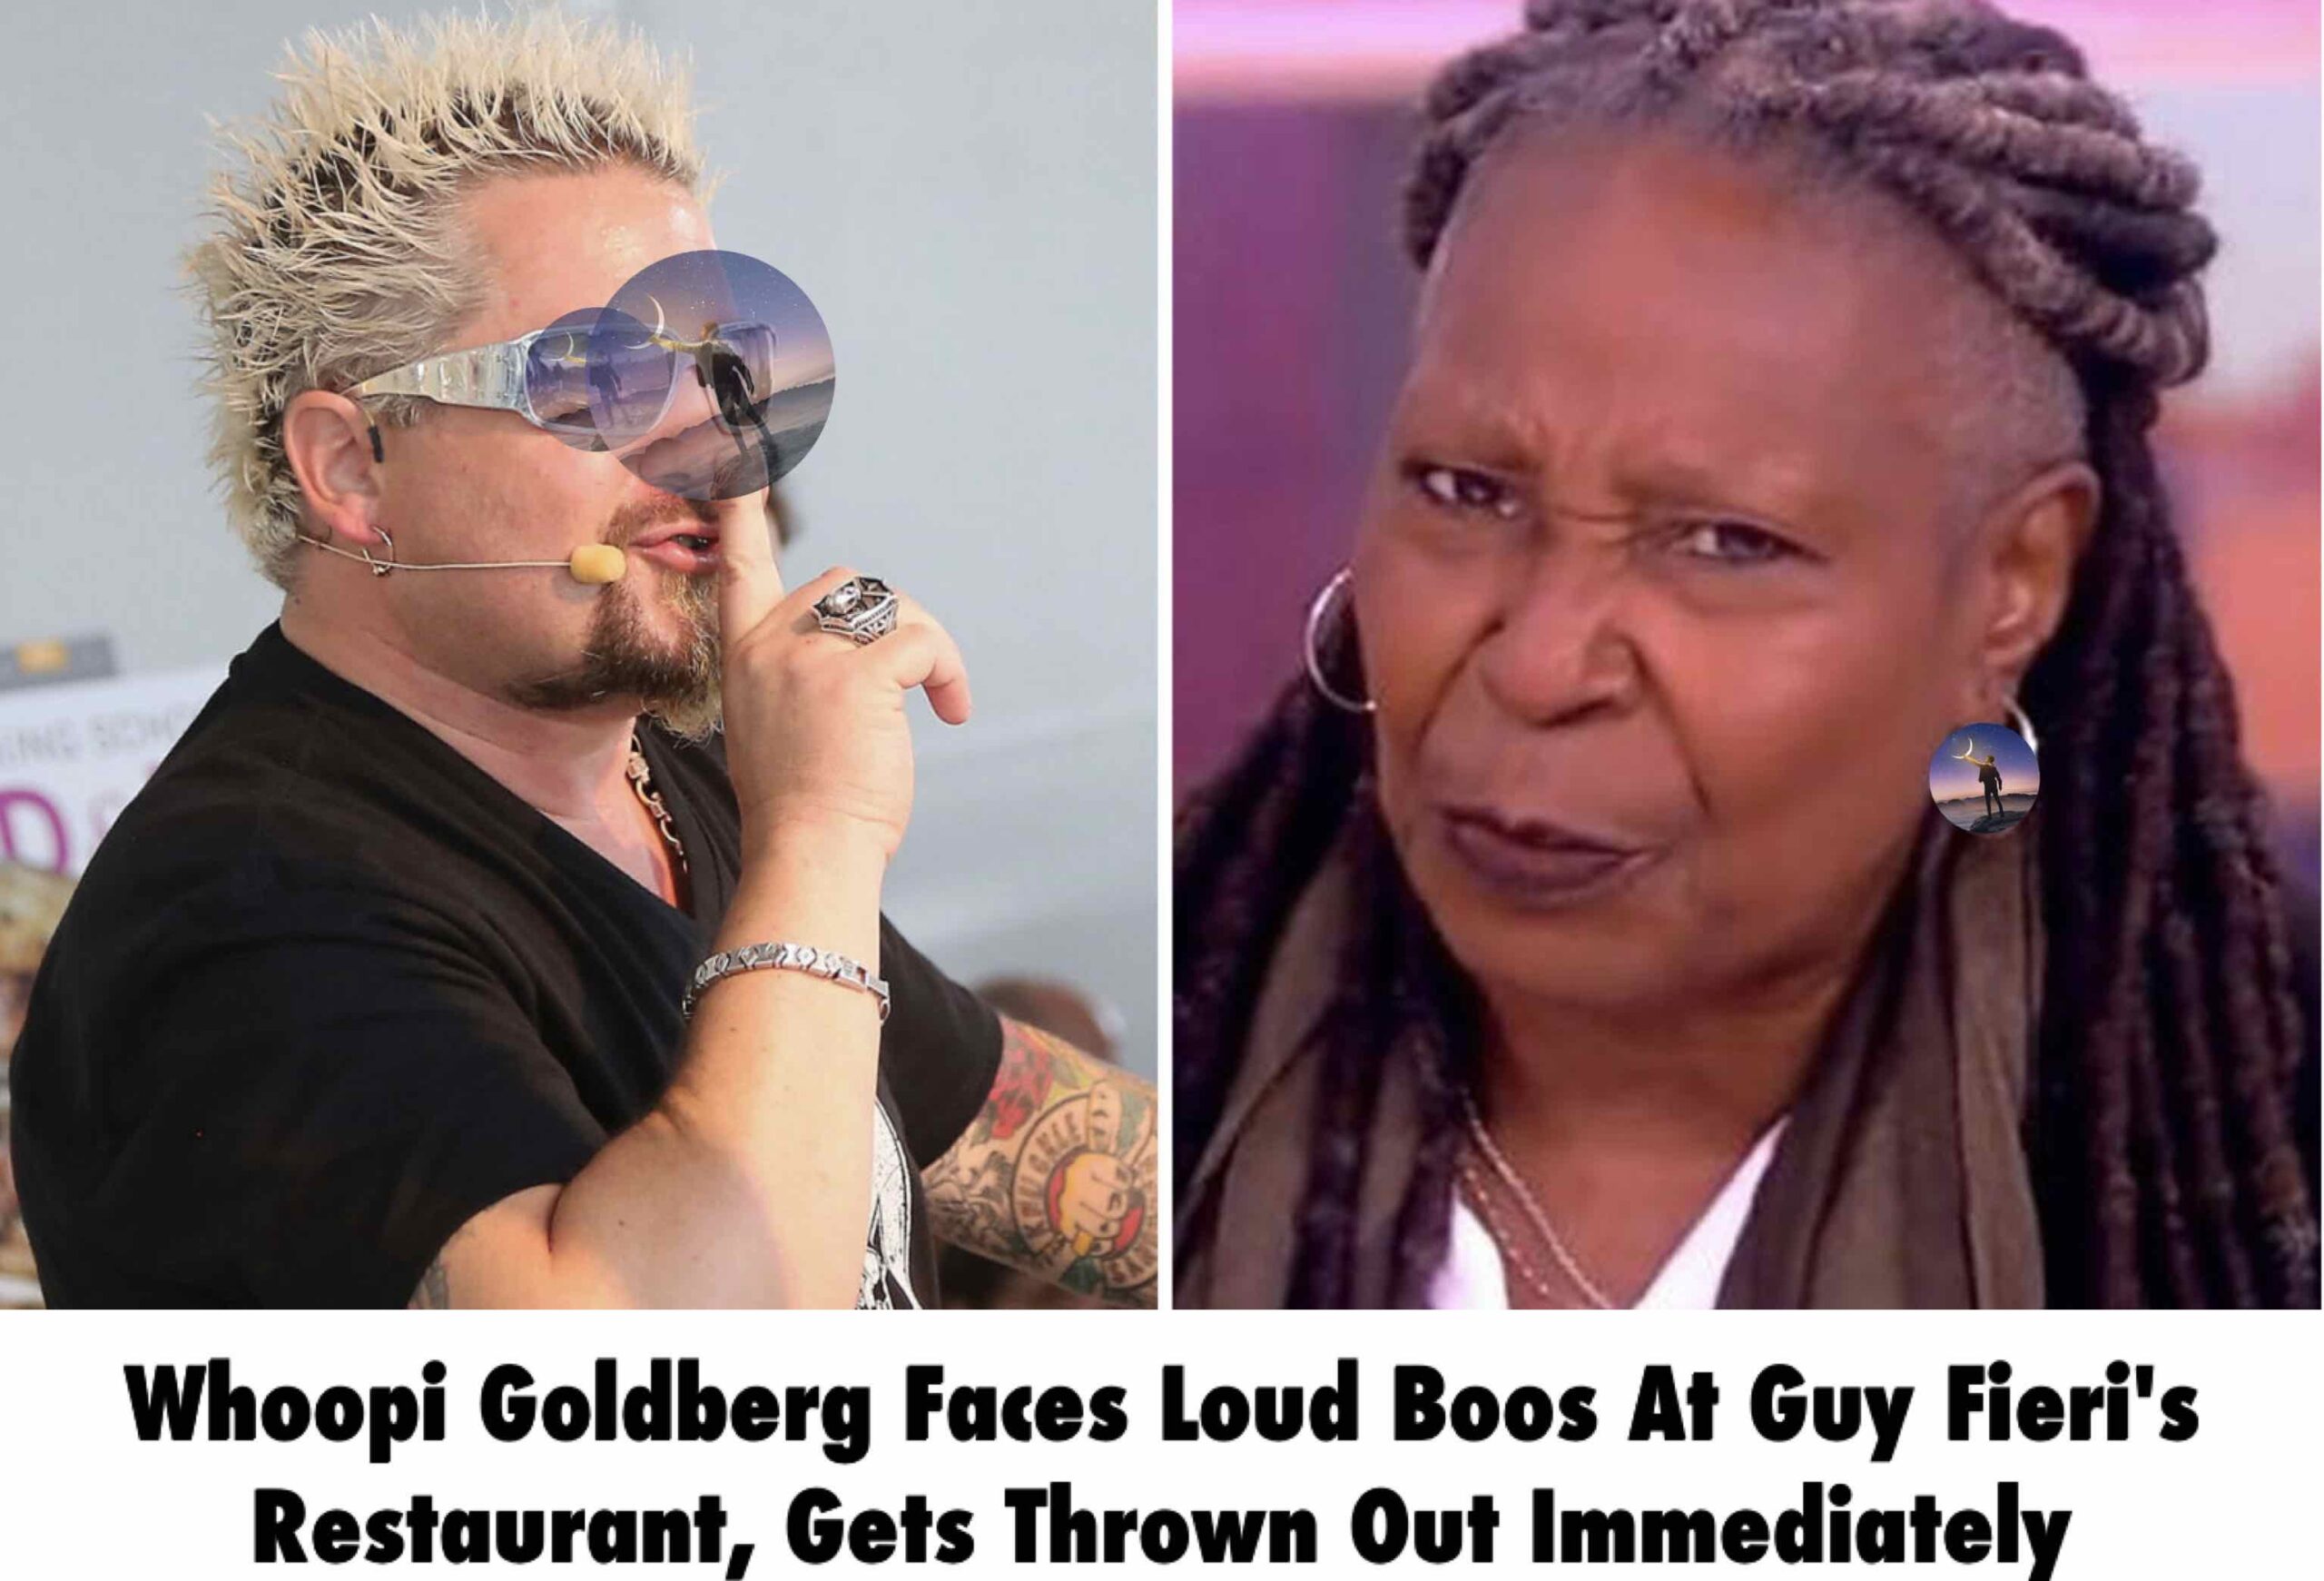 Breaking: Whoopi Goldberg Booed Off Loudly At Guy Fieri’s Restaurant, Gets Kicked Off Immediately